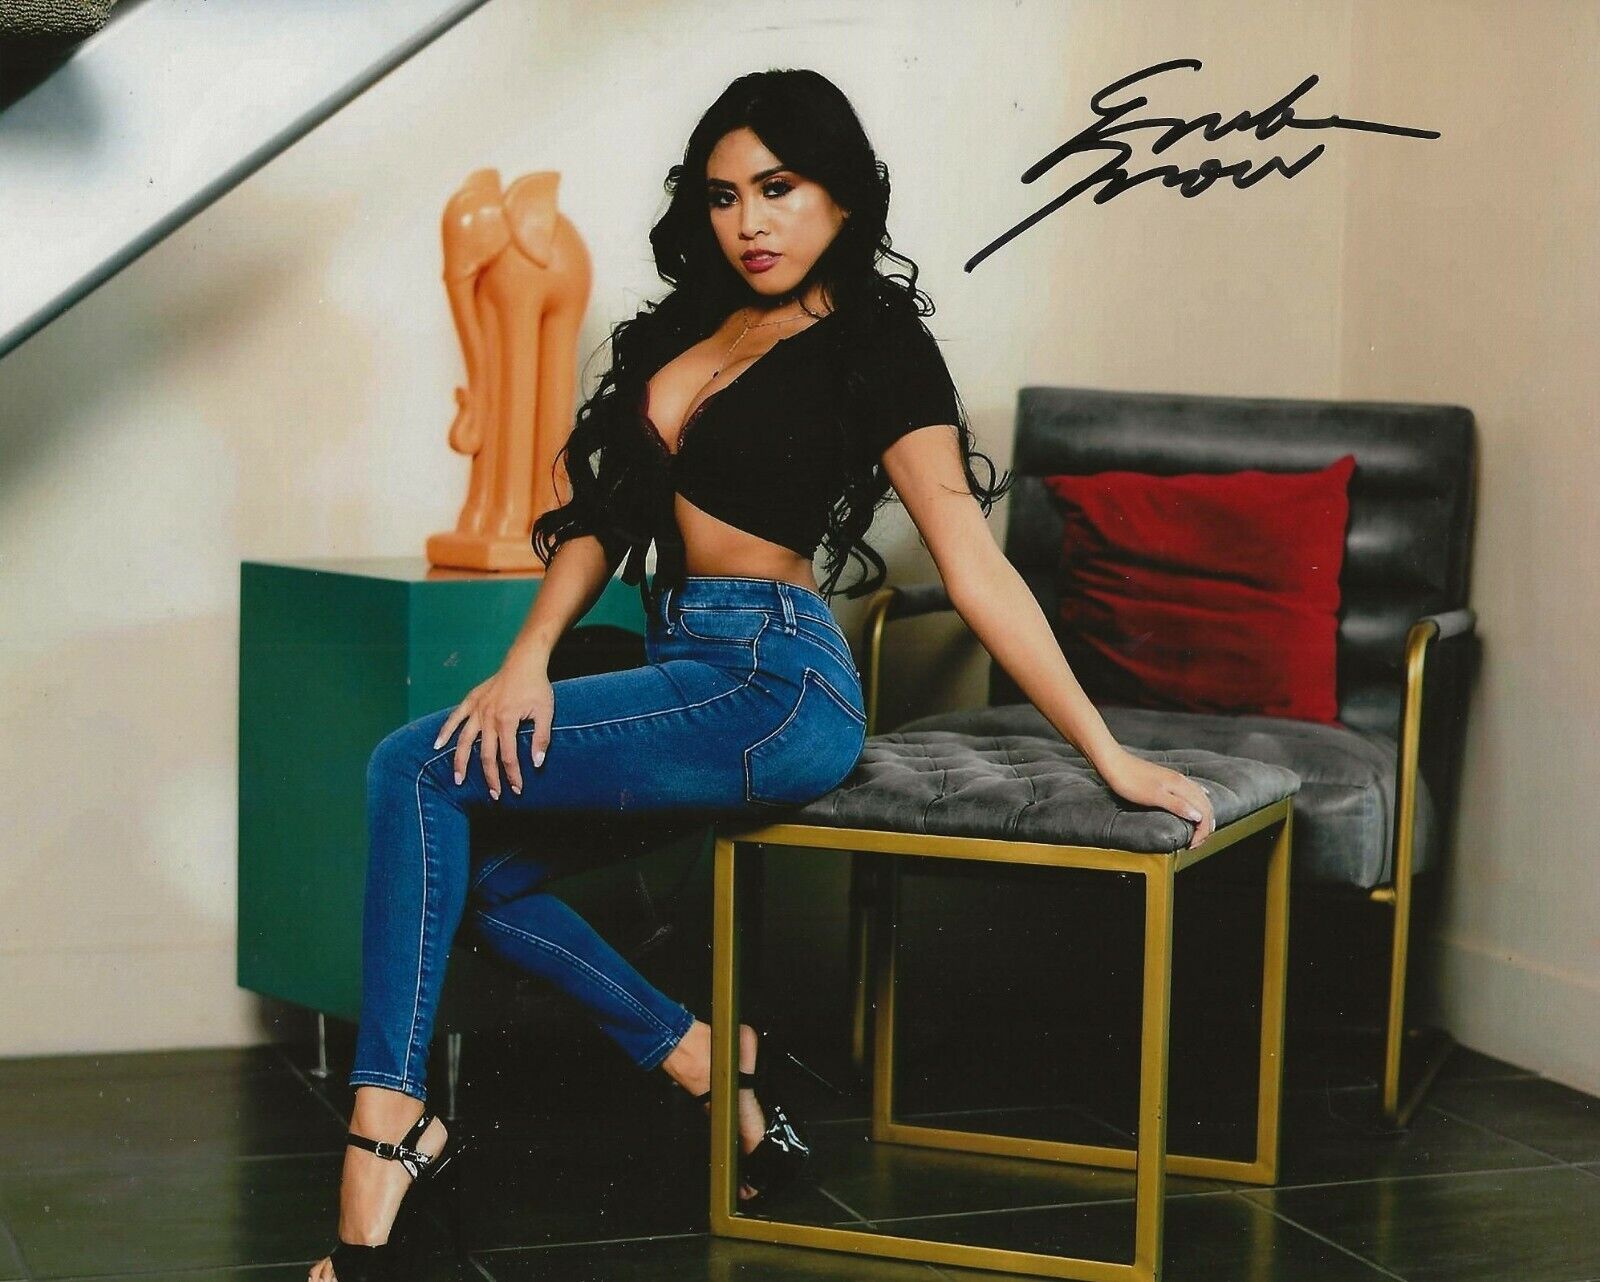 Ember Snow Adult Video Star signed Hot 8x10 Photo Poster painting autographed 7